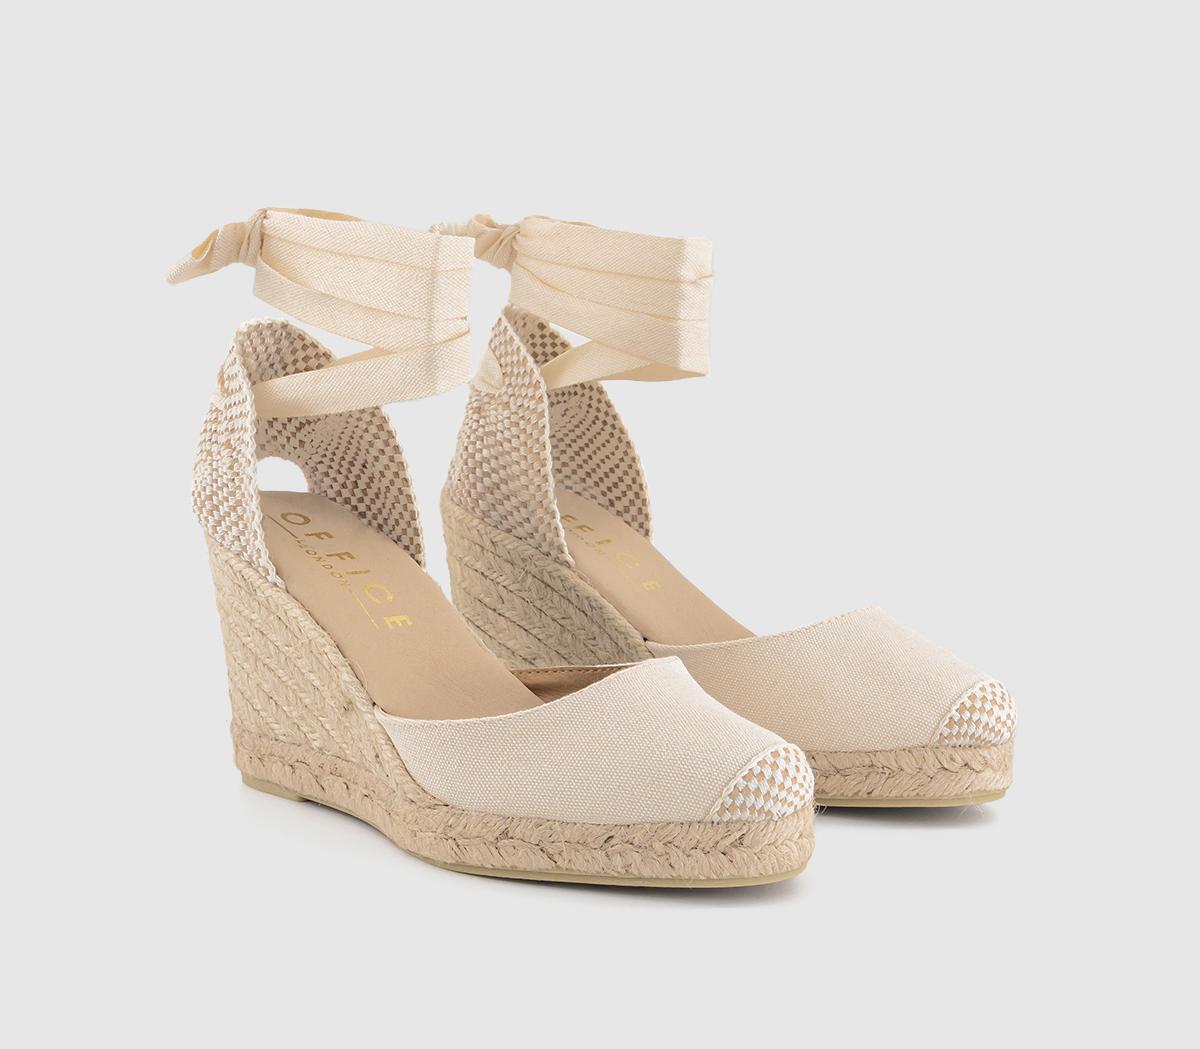 OFFICE Womens Marmalade Ankle Tie Espadrille Wedges Cream Canvas, 5